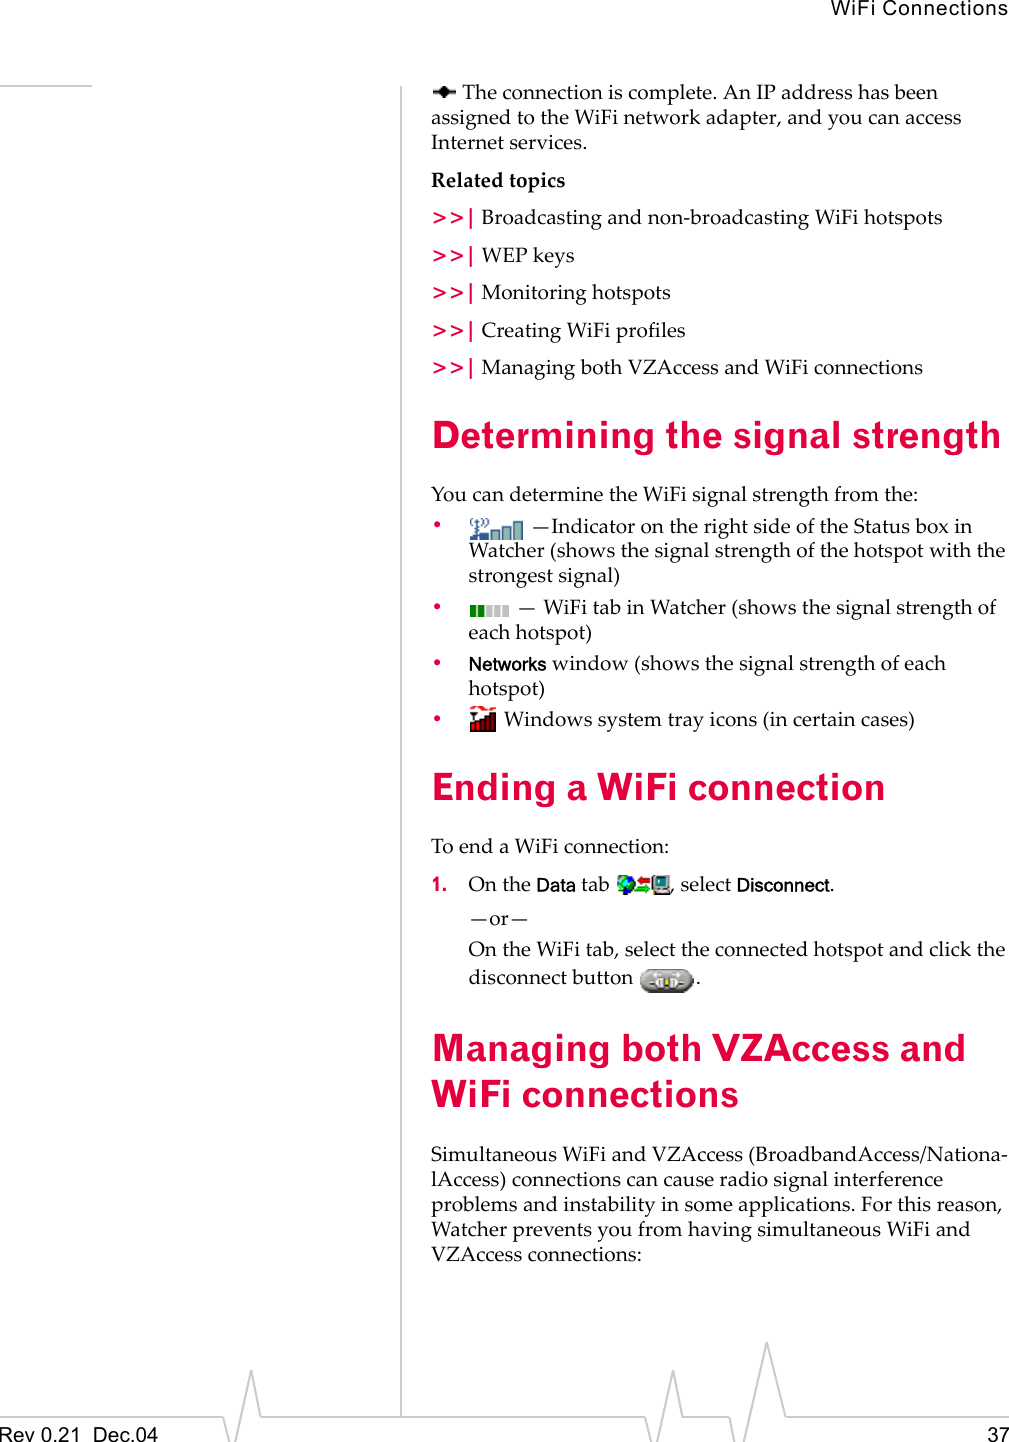 WiFi ConnectionsRev 0.21  Dec.04 37 The connection is complete. An IP address has been assigned to the WiFi network adapter, and you can access Internet services.Related topics&gt;&gt;| Broadcasting and non-broadcasting WiFi hotspots&gt;&gt;| WEP keys&gt;&gt;| Monitoring hotspots&gt;&gt;| Creating WiFi profiles&gt;&gt;| Managing both VZAccess and WiFi connectionsDetermining the signal strengthYou can determine the WiFi signal strength from the:• —Indicator on the right side of the Status box in Watcher (shows the signal strength of the hotspot with the strongest signal) • — WiFi tab in Watcher (shows the signal strength of each hotspot)•Networks window (shows the signal strength of each hotspot)• Windows system tray icons (in certain cases)Ending a WiFi connectionTo end a WiFi connection:1. On the Data tab  , select Disconnect.—or—On the WiFi tab, select the connected hotspot and click the disconnect button  .Managing both VZAccess and WiFi connectionsSimultaneous WiFi and VZAccess (BroadbandAccess/Nationa-lAccess) connections can cause radio signal interference problems and instability in some applications. For this reason, Watcher prevents you from having simultaneous WiFi and VZAccess connections: